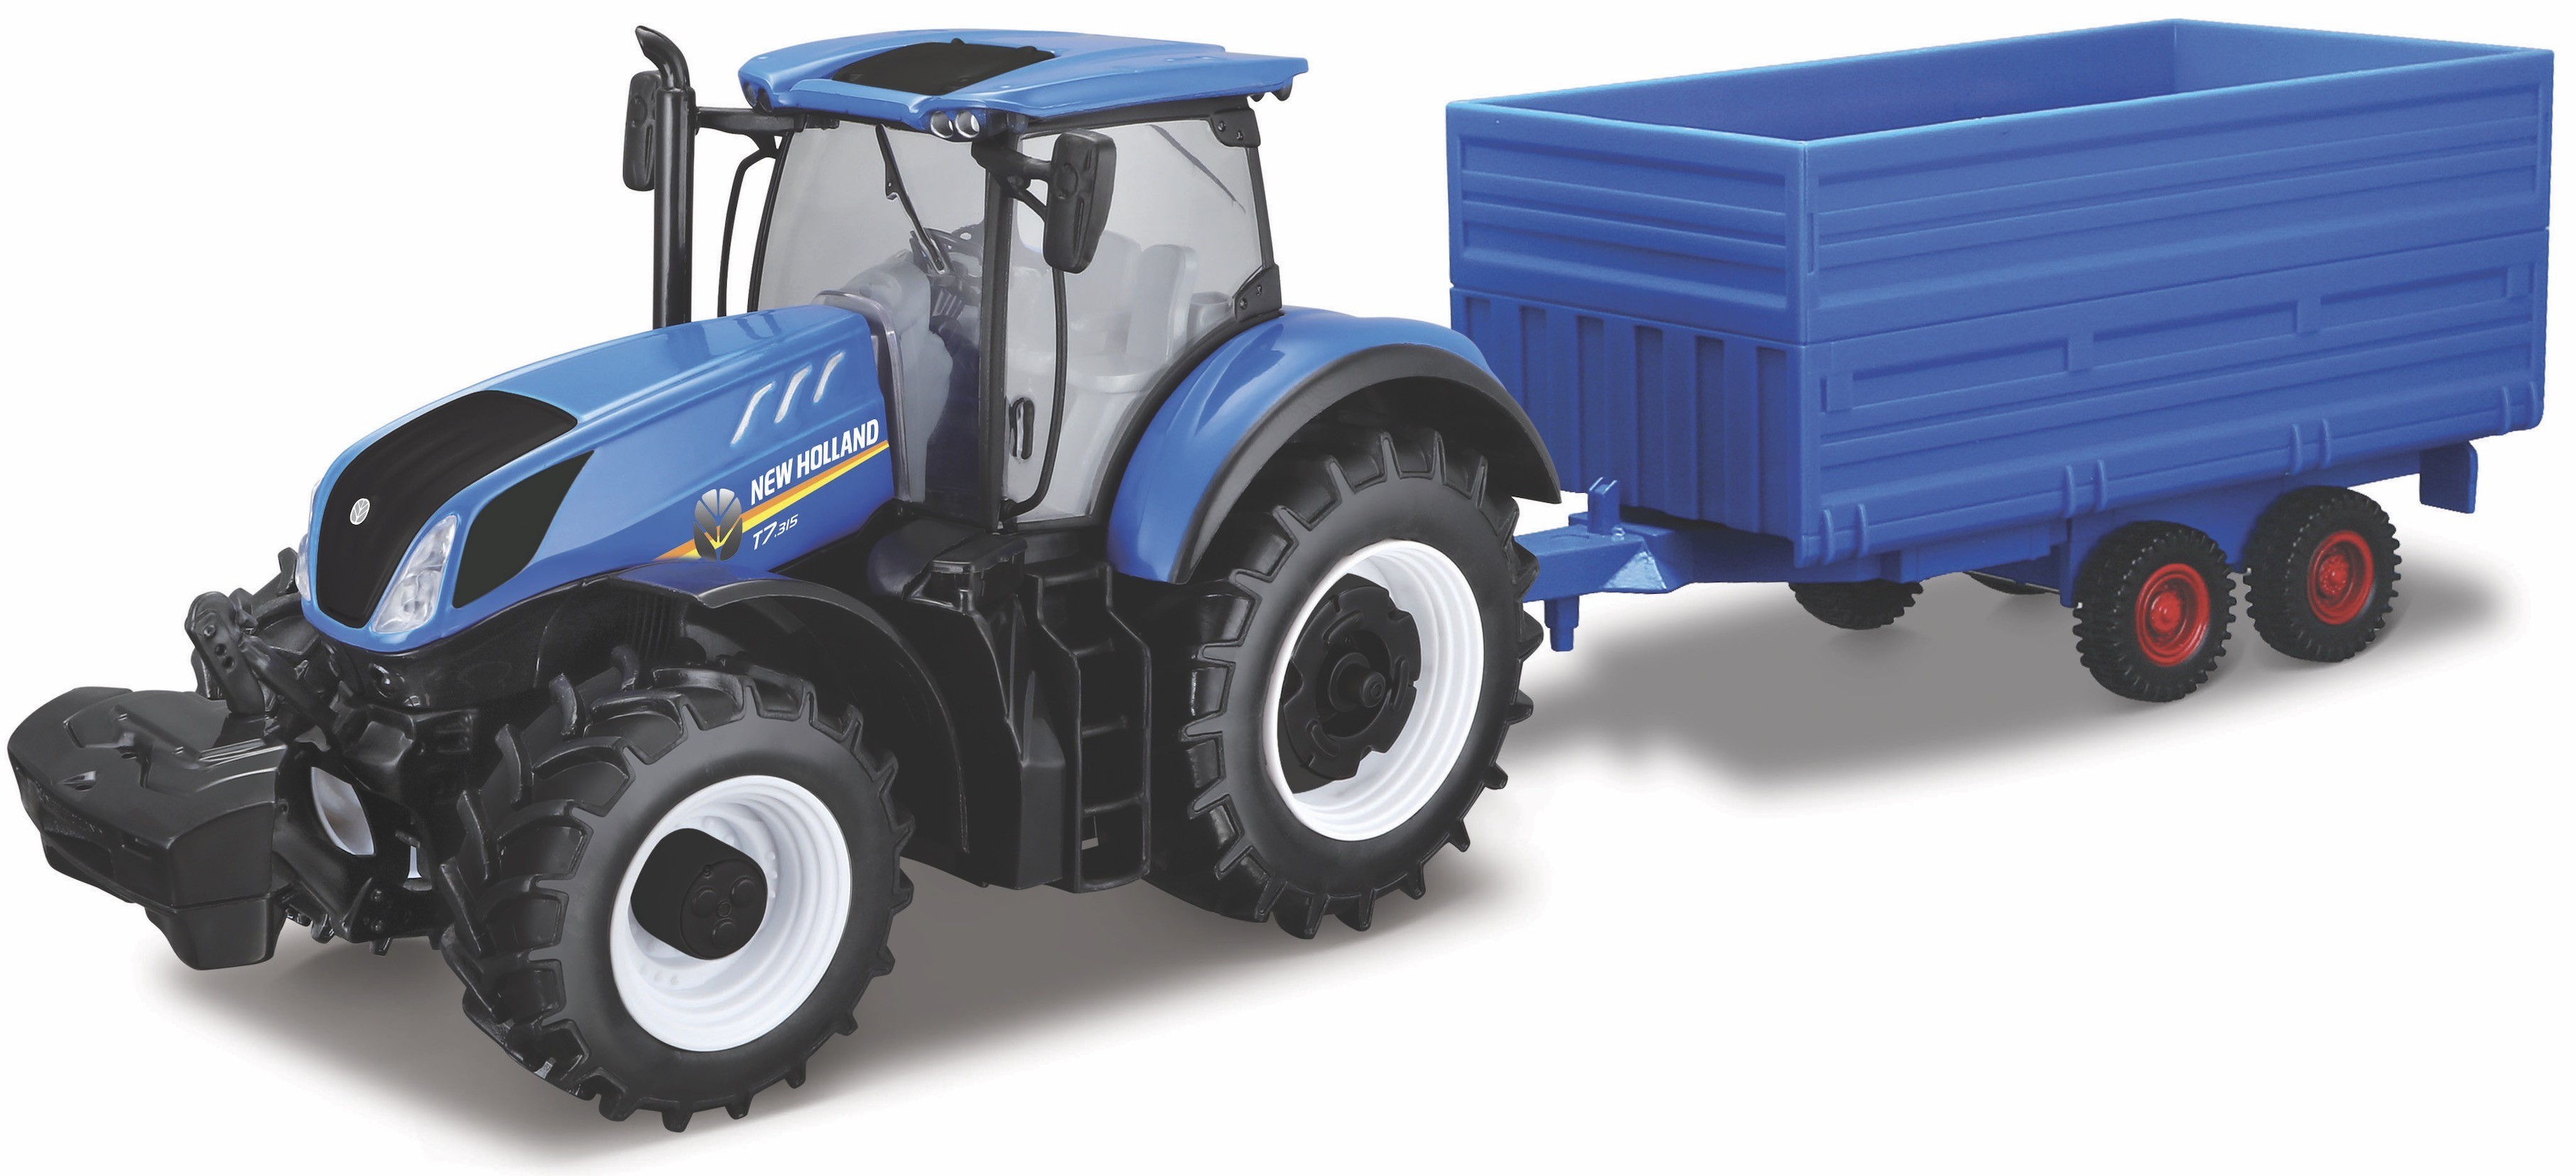 NEW HOLLAND T7HD TRACTOR+ TRAILER